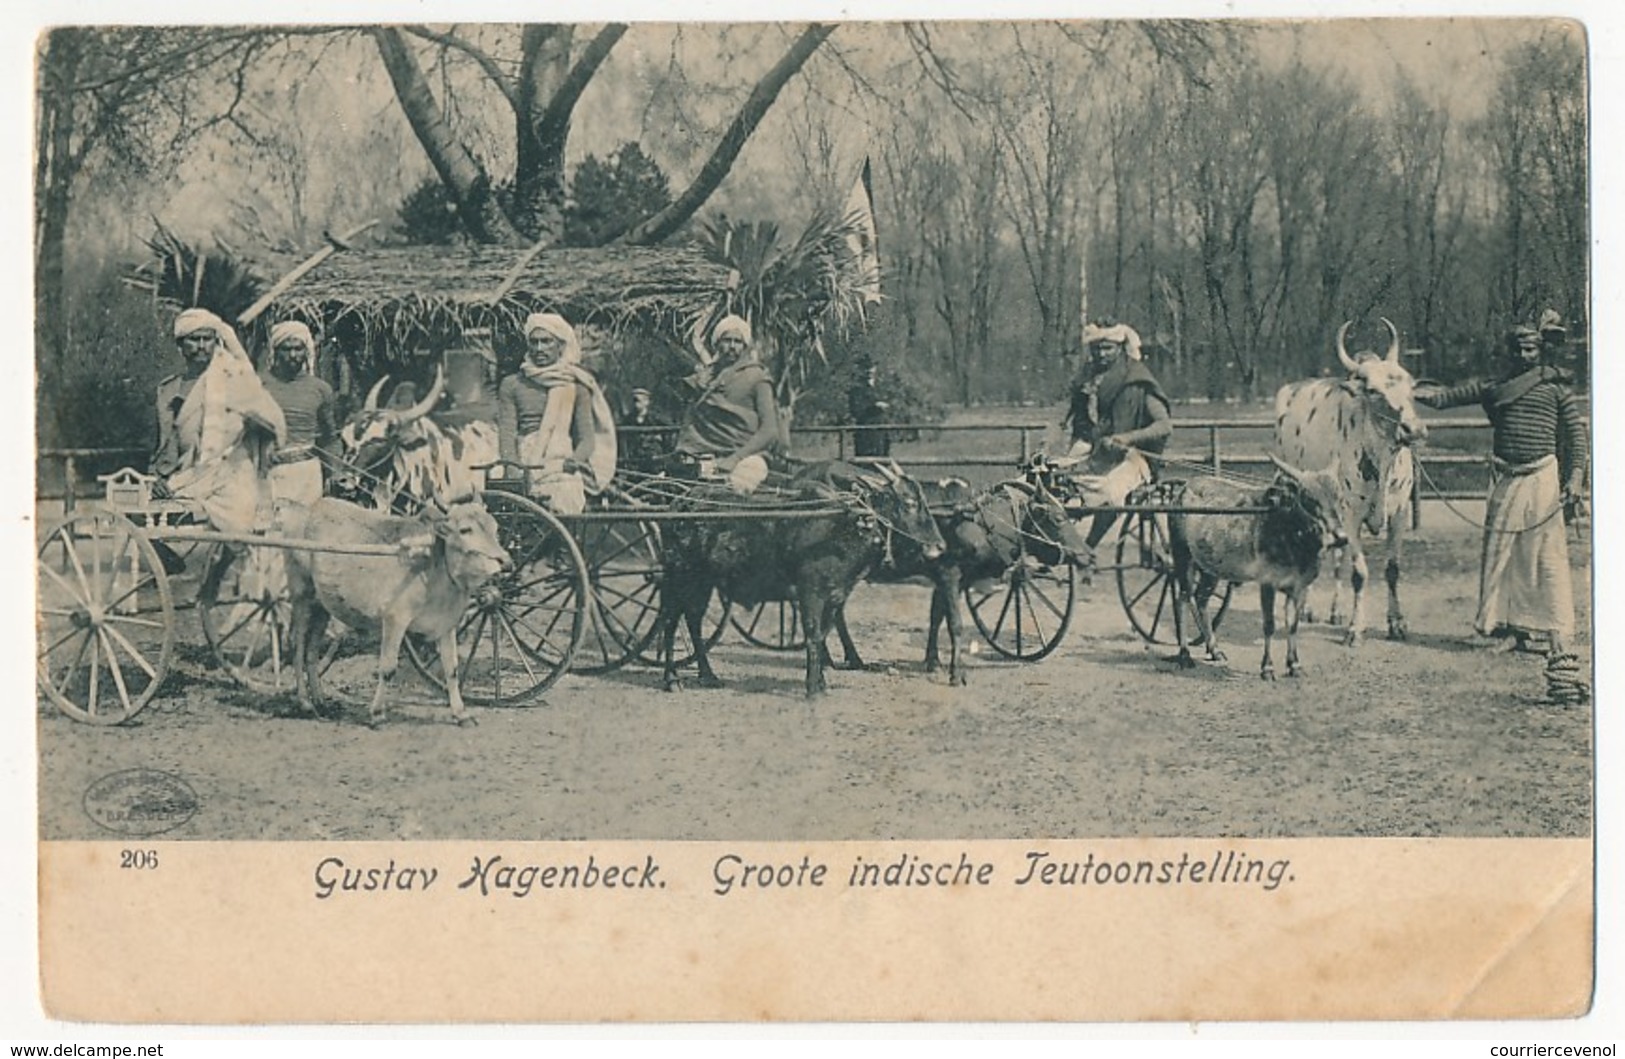 Lot 6 CPA - (Cirque) Gustav Hagenbeck - Exposition indienne (Groote indische Teutoonstelling) - dont Montreurs d'ours